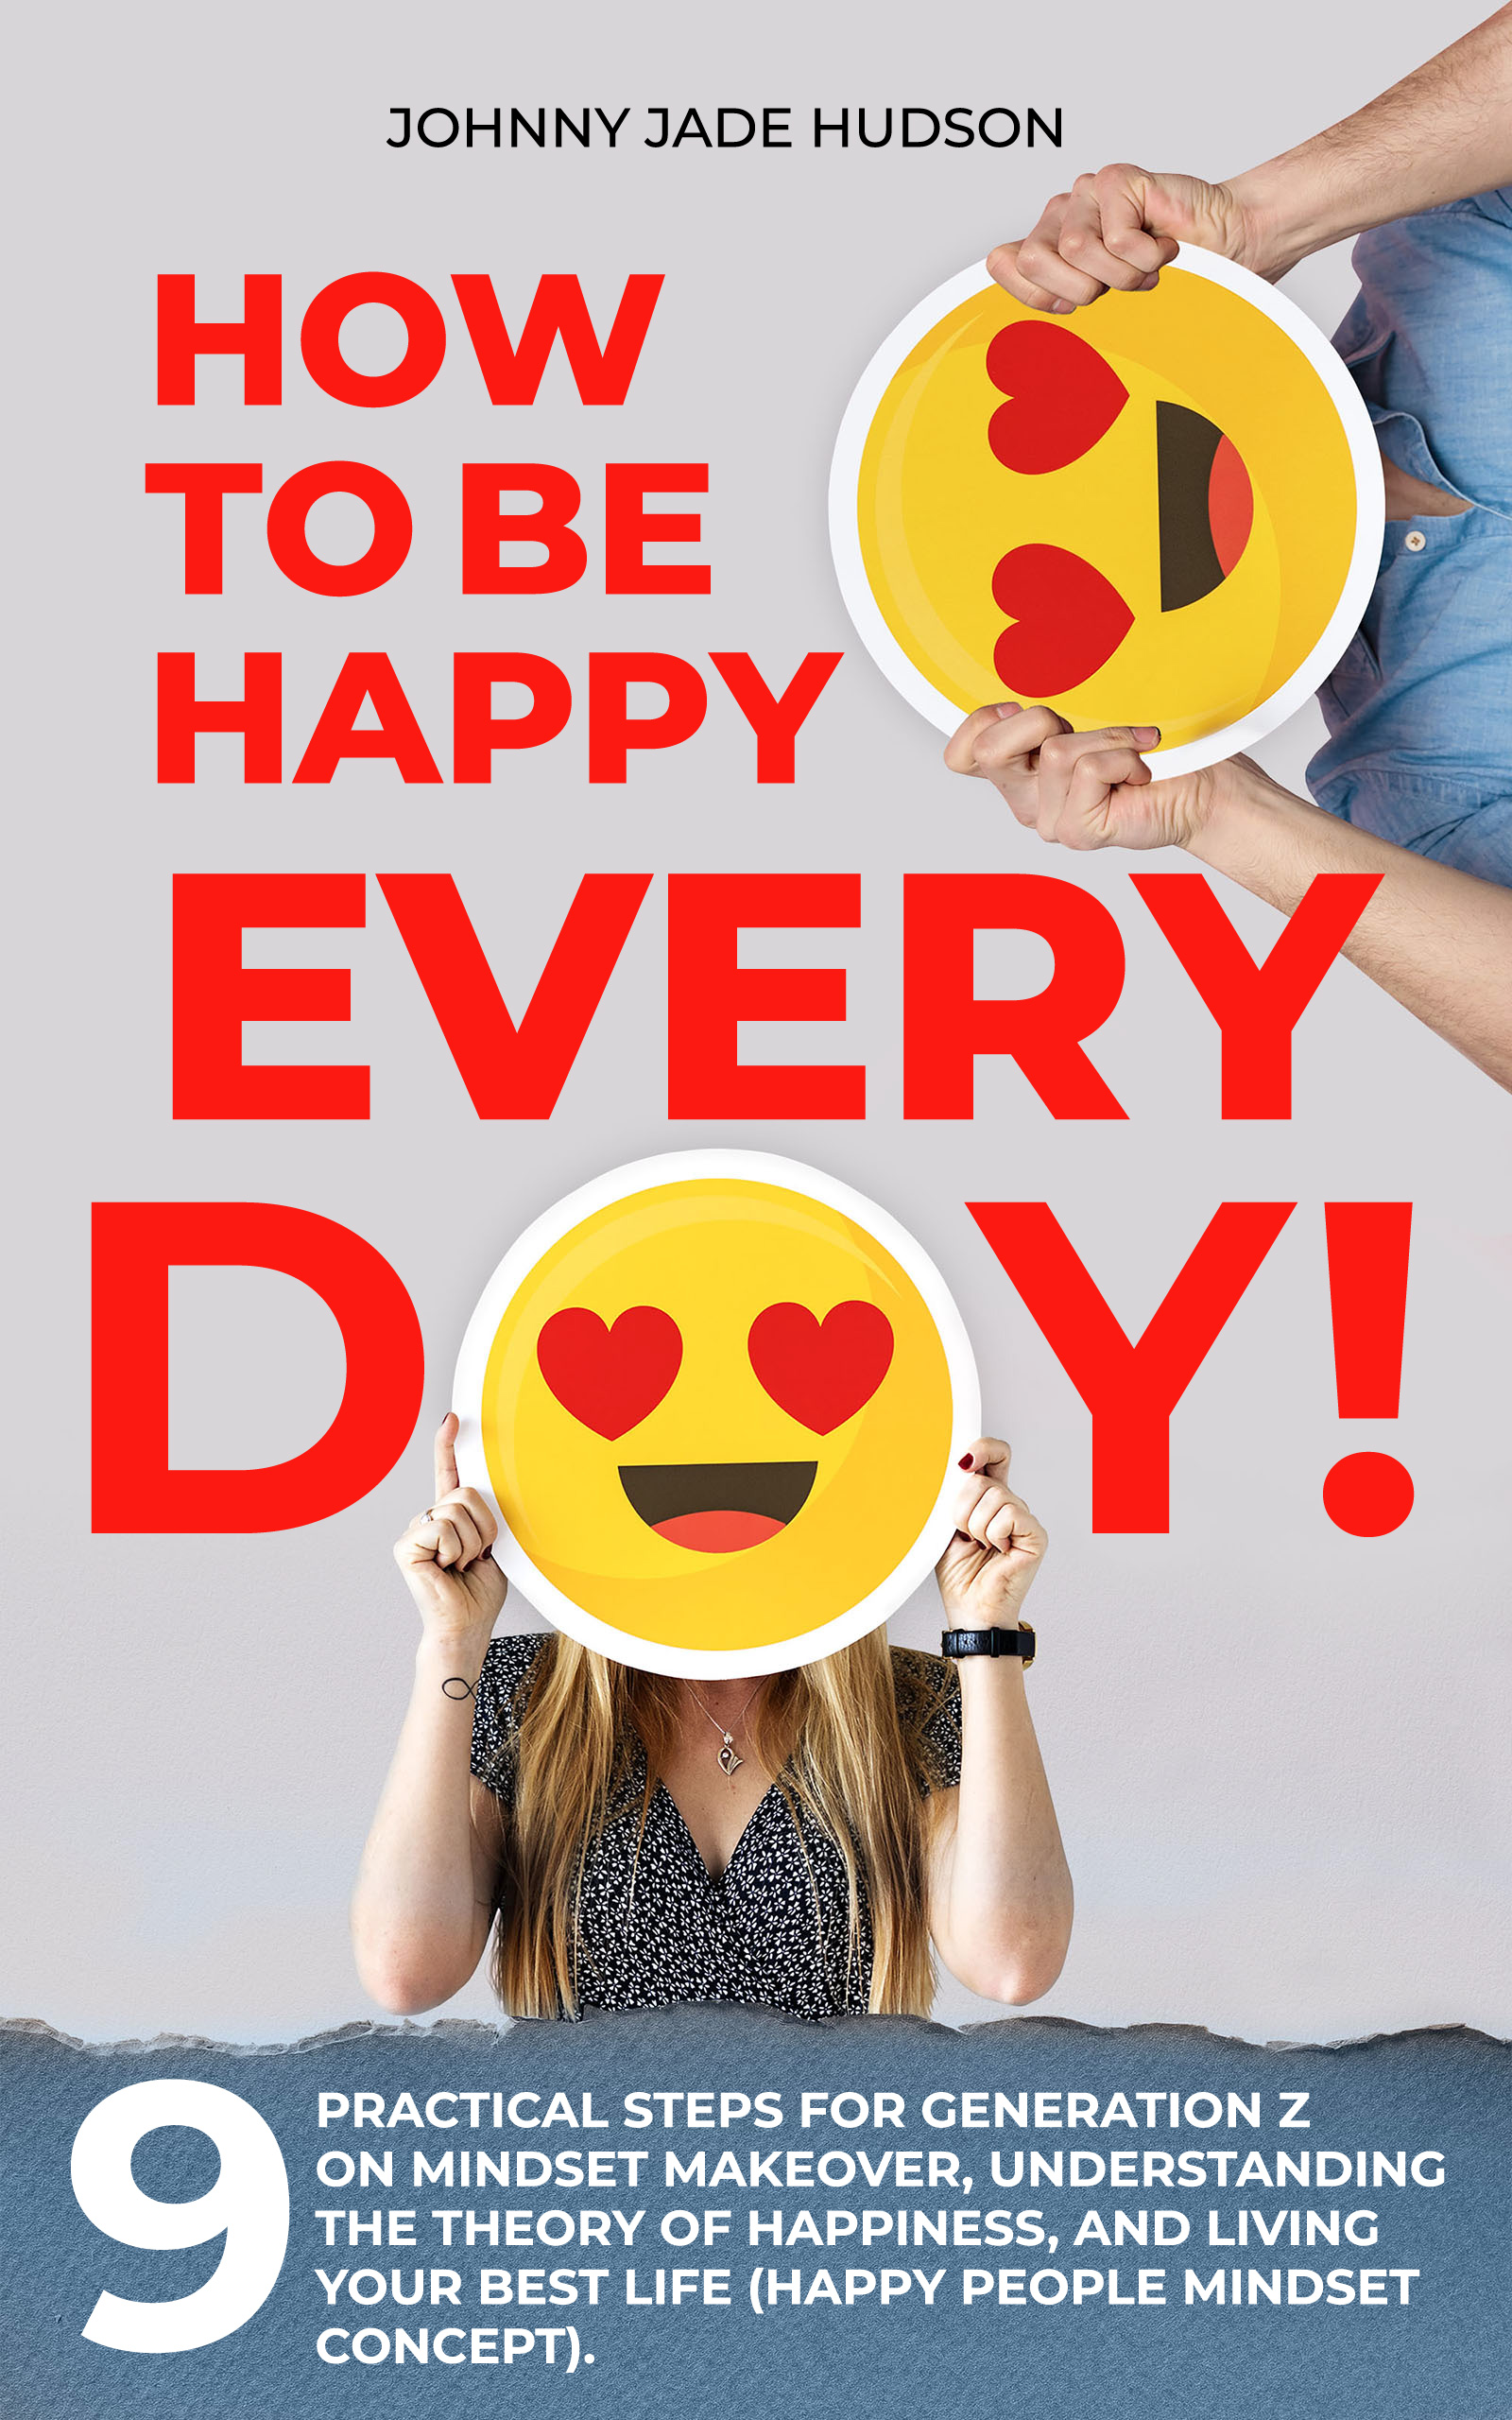 FREE: How to Be Happy Every Day! Nine Practical Steps for Generation Z on Mindset Makeover, Understanding the Theory of Happiness, and Living Your Best Life (Happy People Mindset Concept) by Johnny Jade Hudson